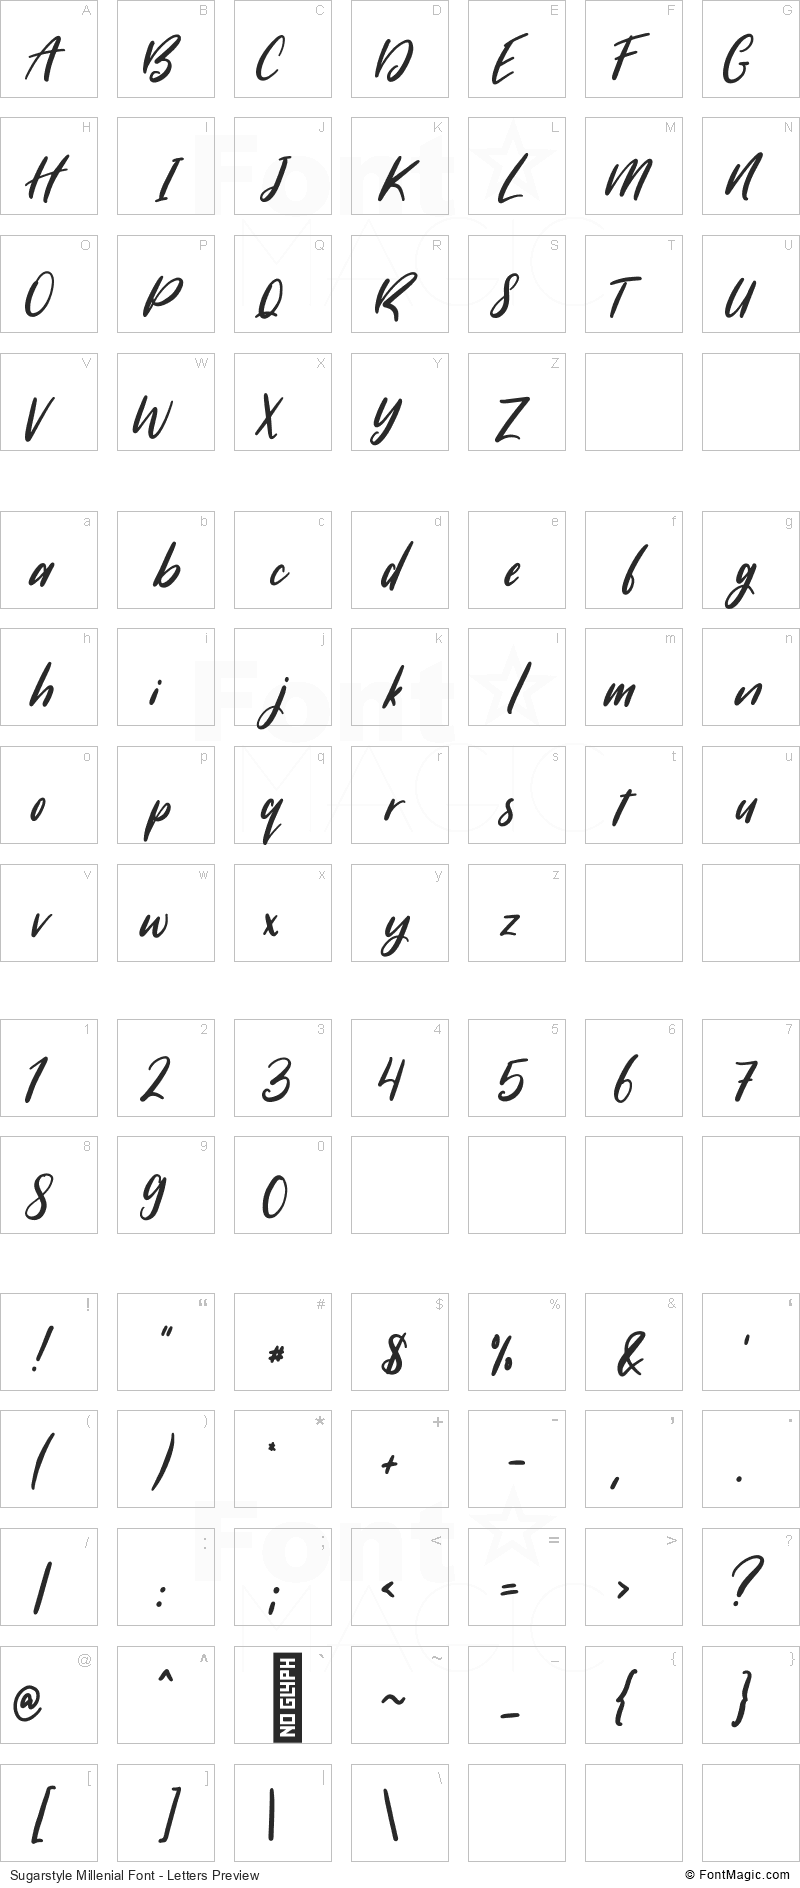 Sugarstyle Millenial Font - All Latters Preview Chart